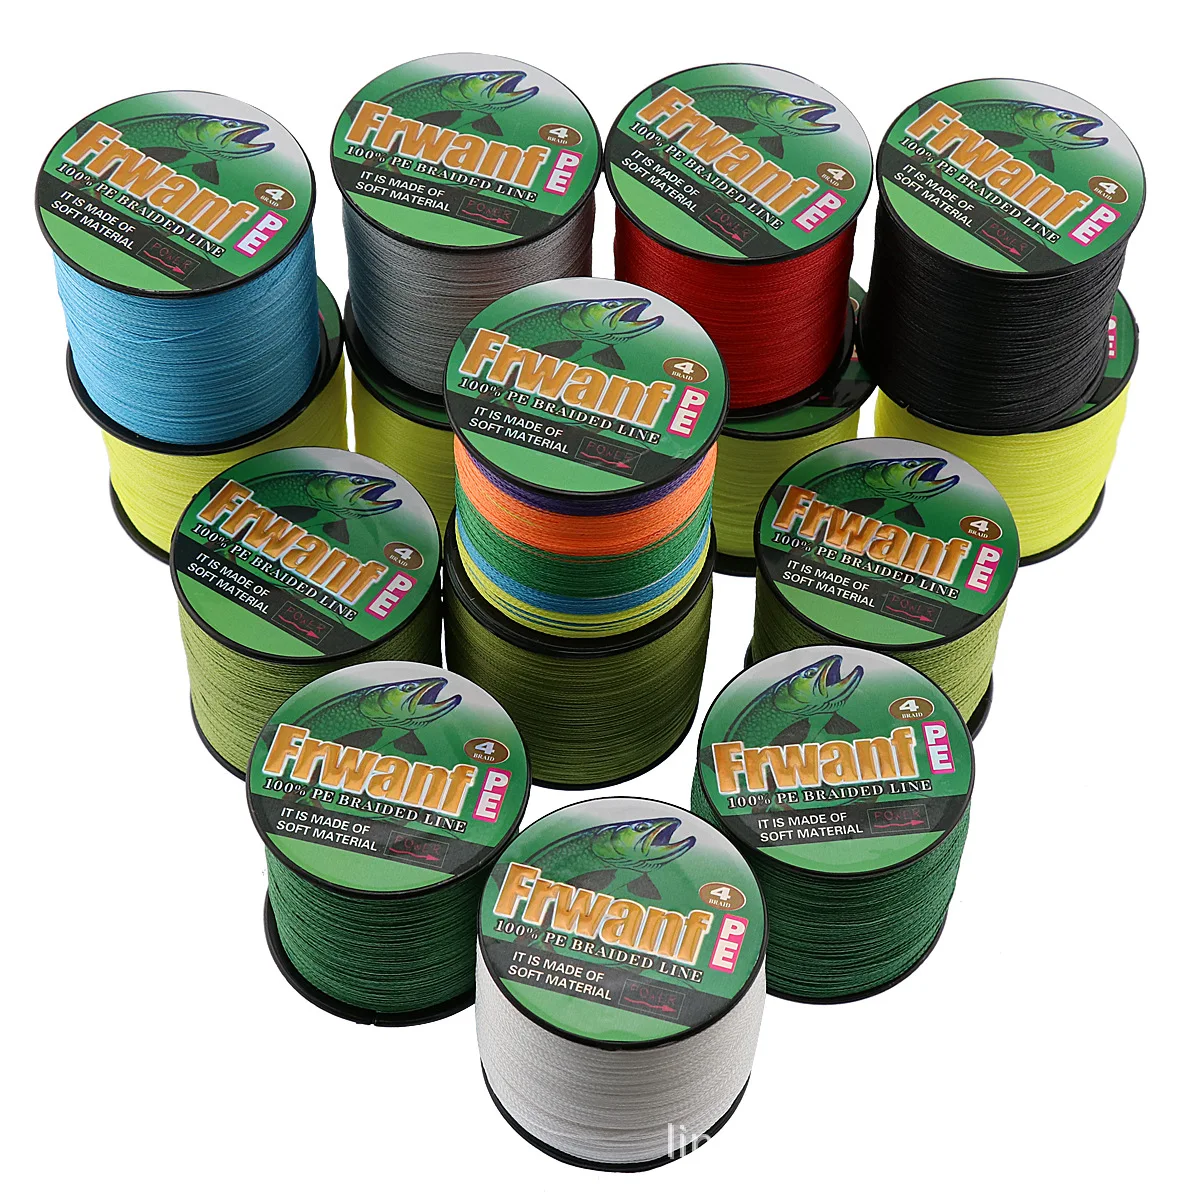 Frwanf Ultra smooth & long casting 4 Strands 500M 1000M 2000M 6LBS -100LBS 100% PE Braided Multifilament Fishing Line, All stock colors